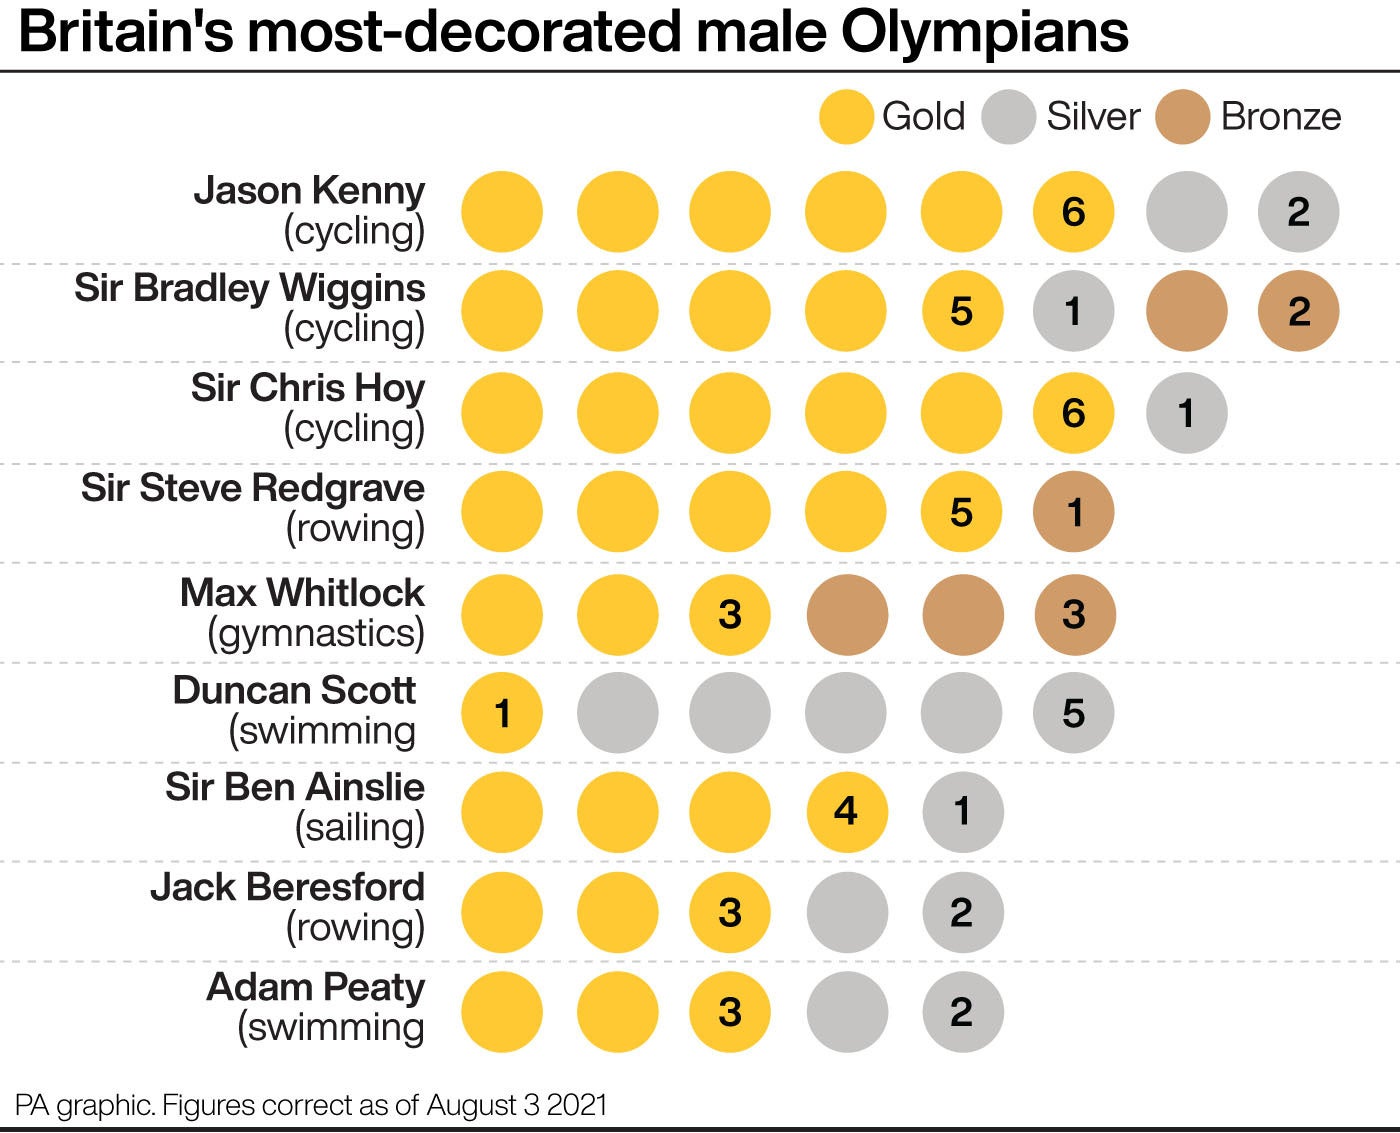 Britain’s most decorated male Olympians (PA graphic)